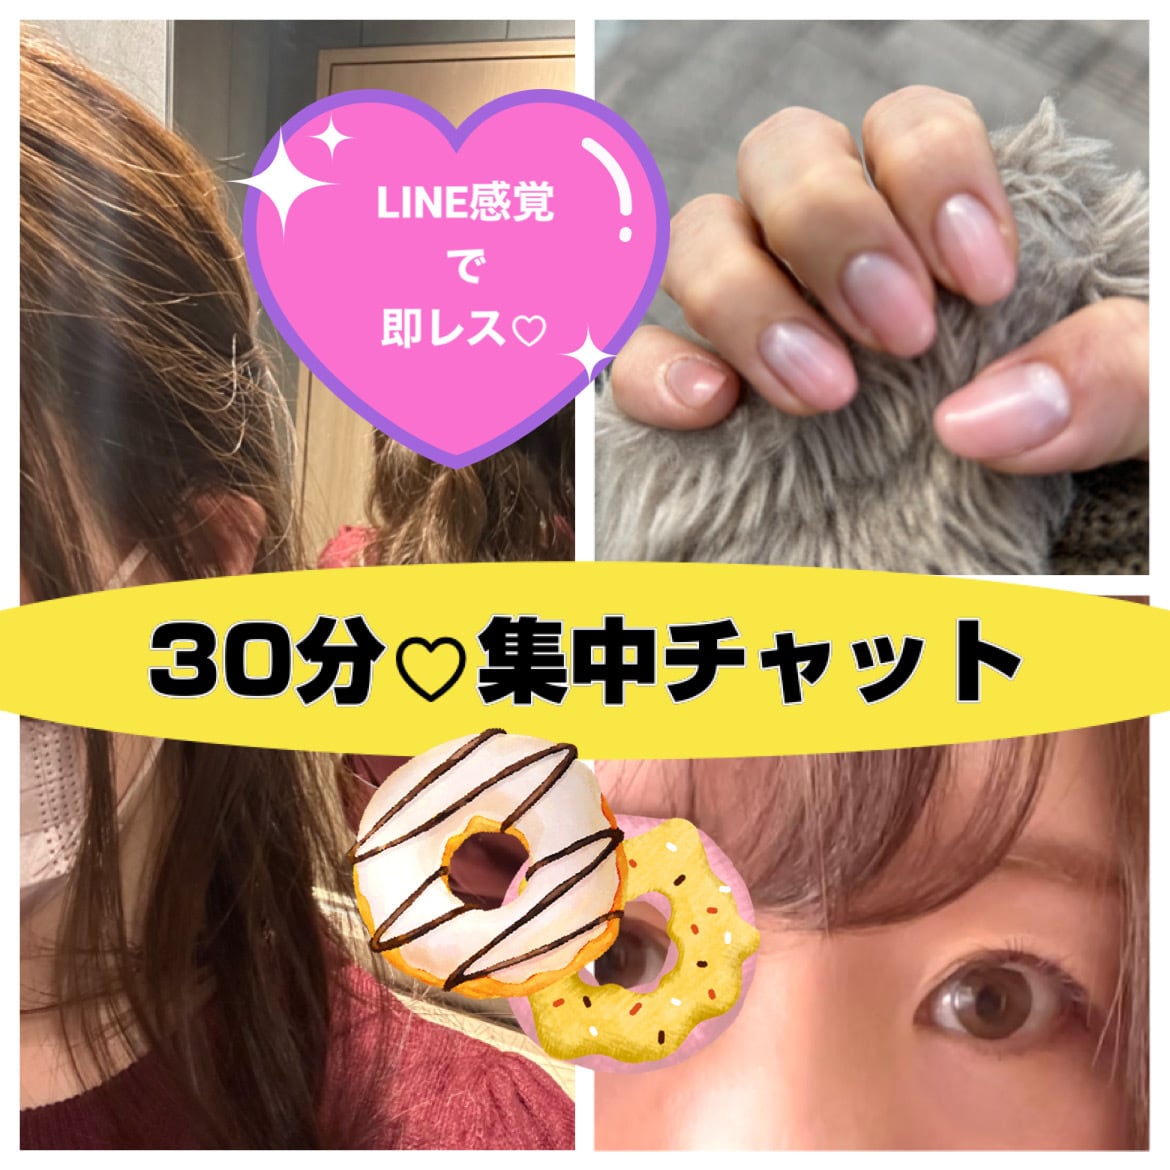 💬 Coconala ｜ 30 minutes intensive chat ♡ I will respond immediately with a LINE feeling Eri ♡ Healing Kansai OL 5.0 …